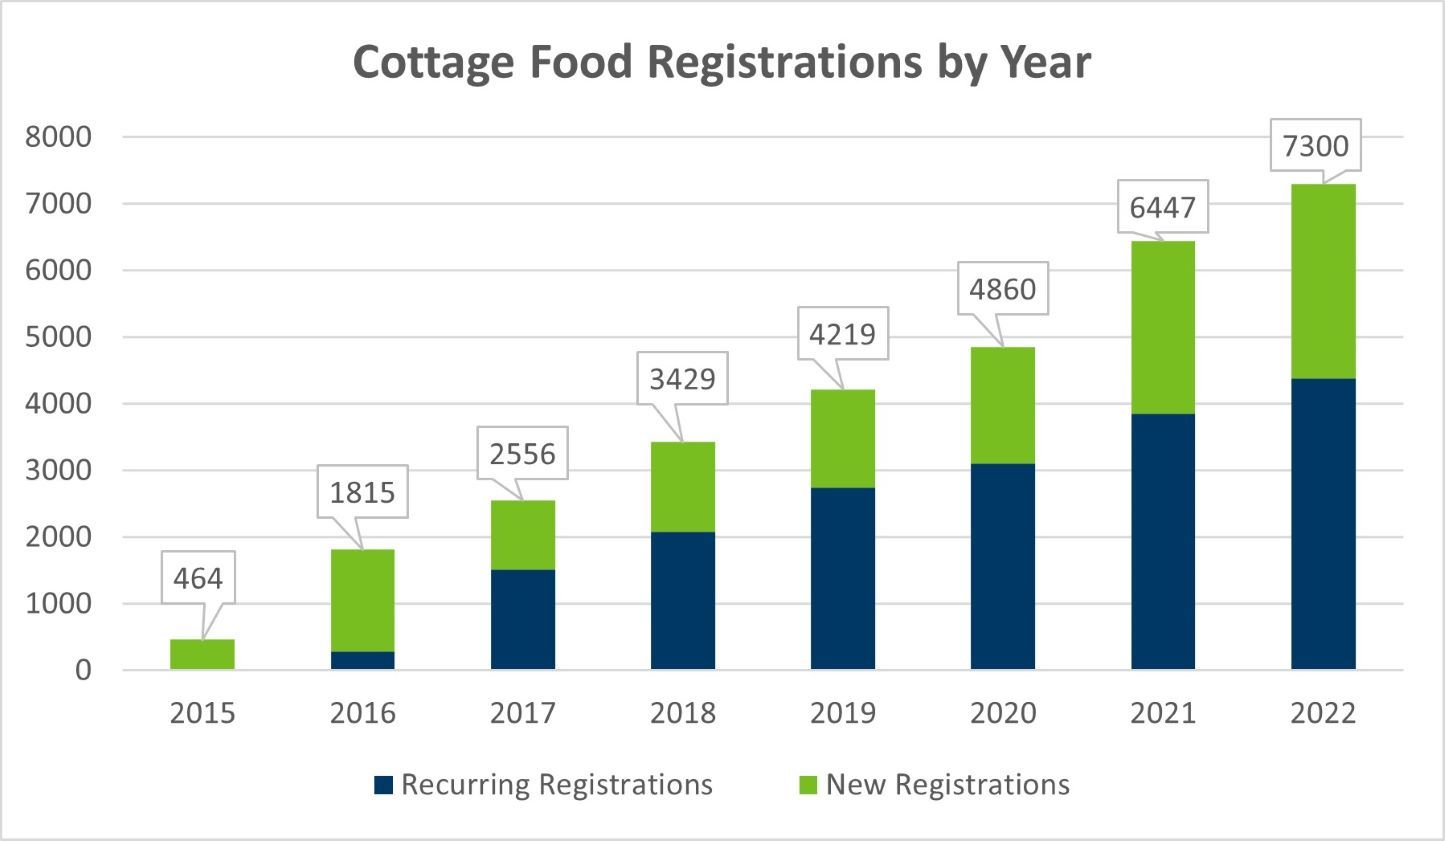 Graph showing Cottage Food Registrations by Year from 2015 - 2022